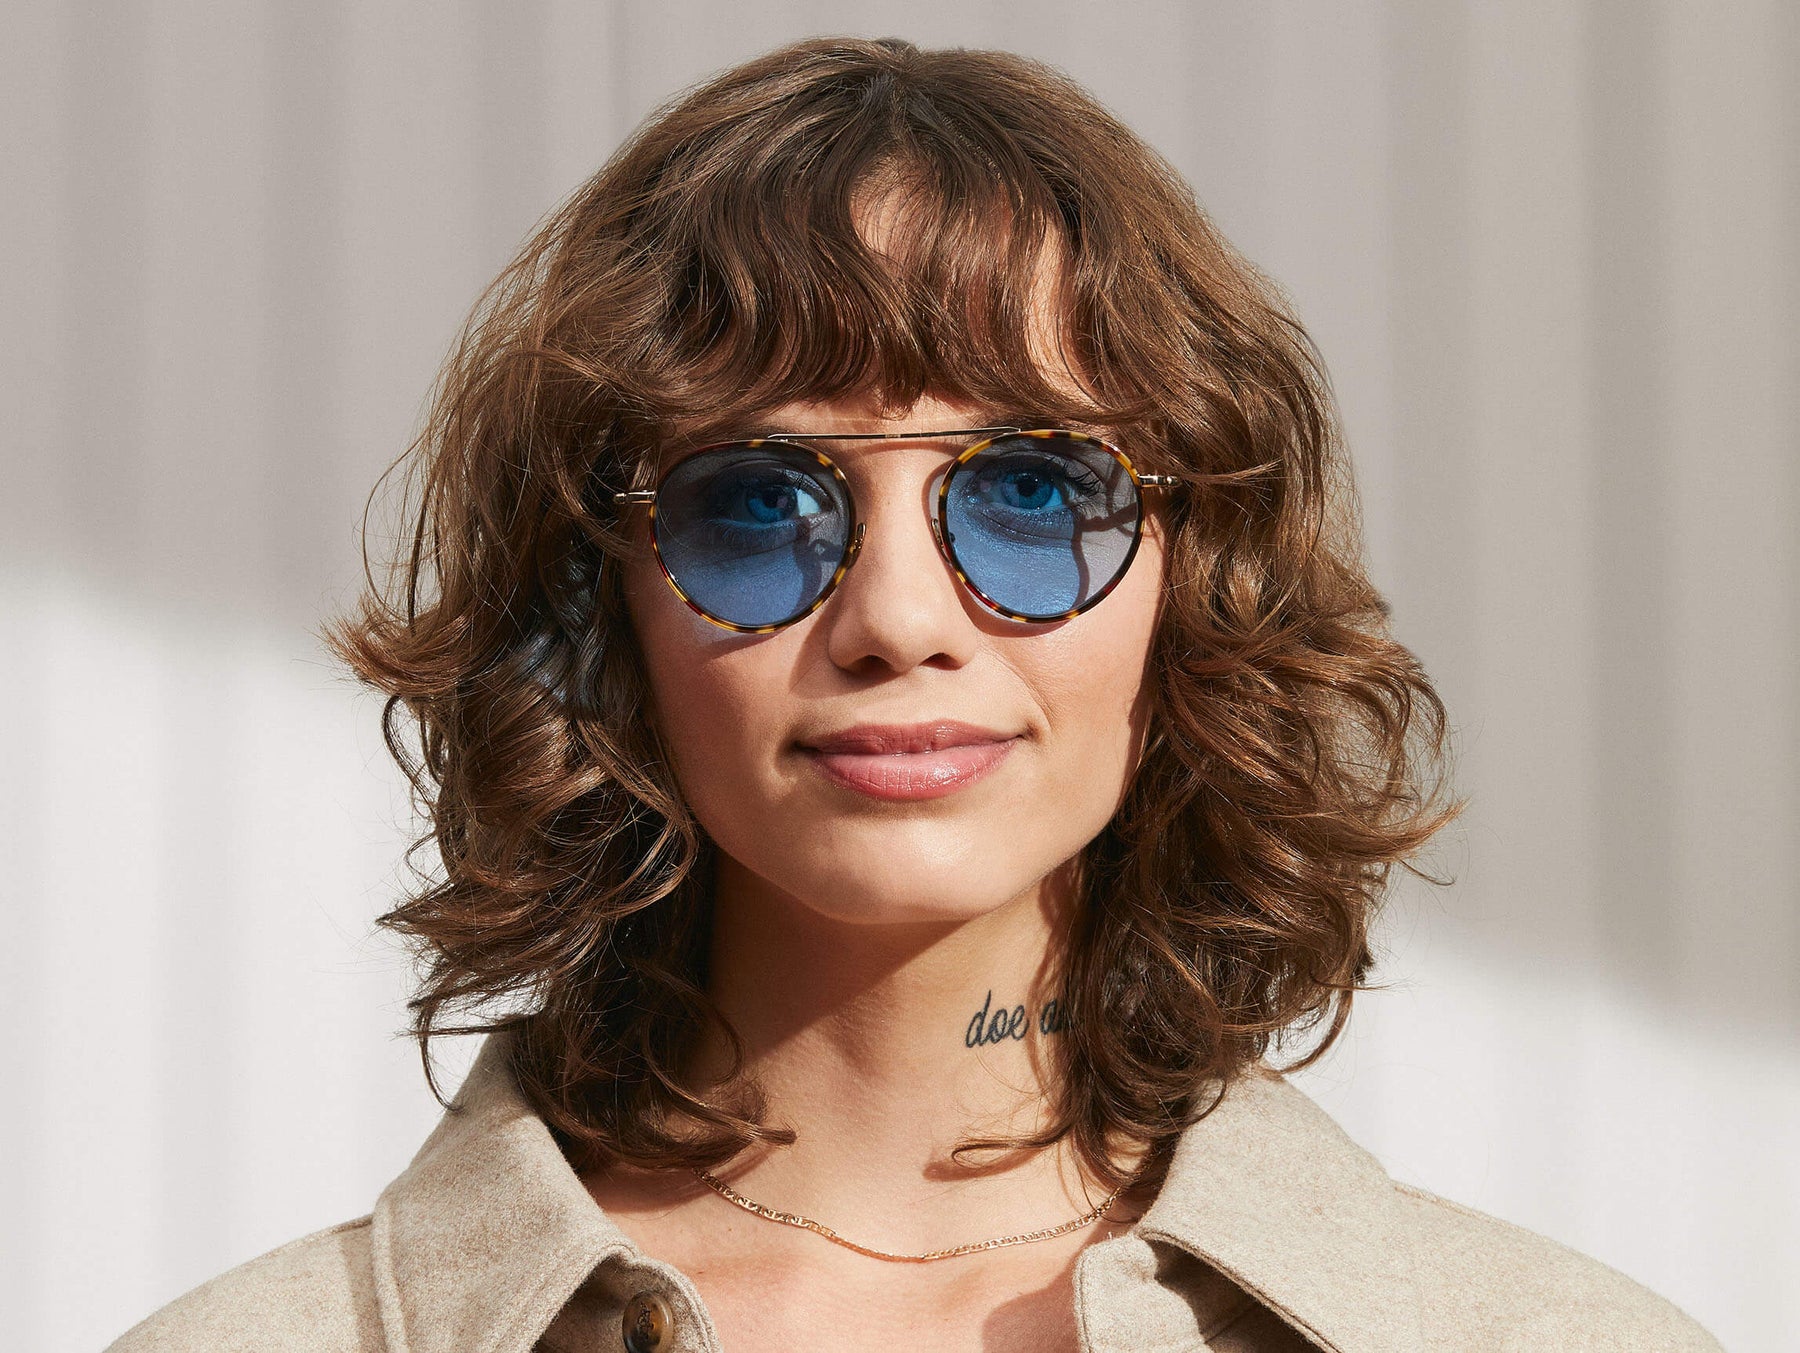 Model is wearing The PUPIK SUN in Tortoise/Gold in size 47 with Celebrity Blue Tinted Lenses